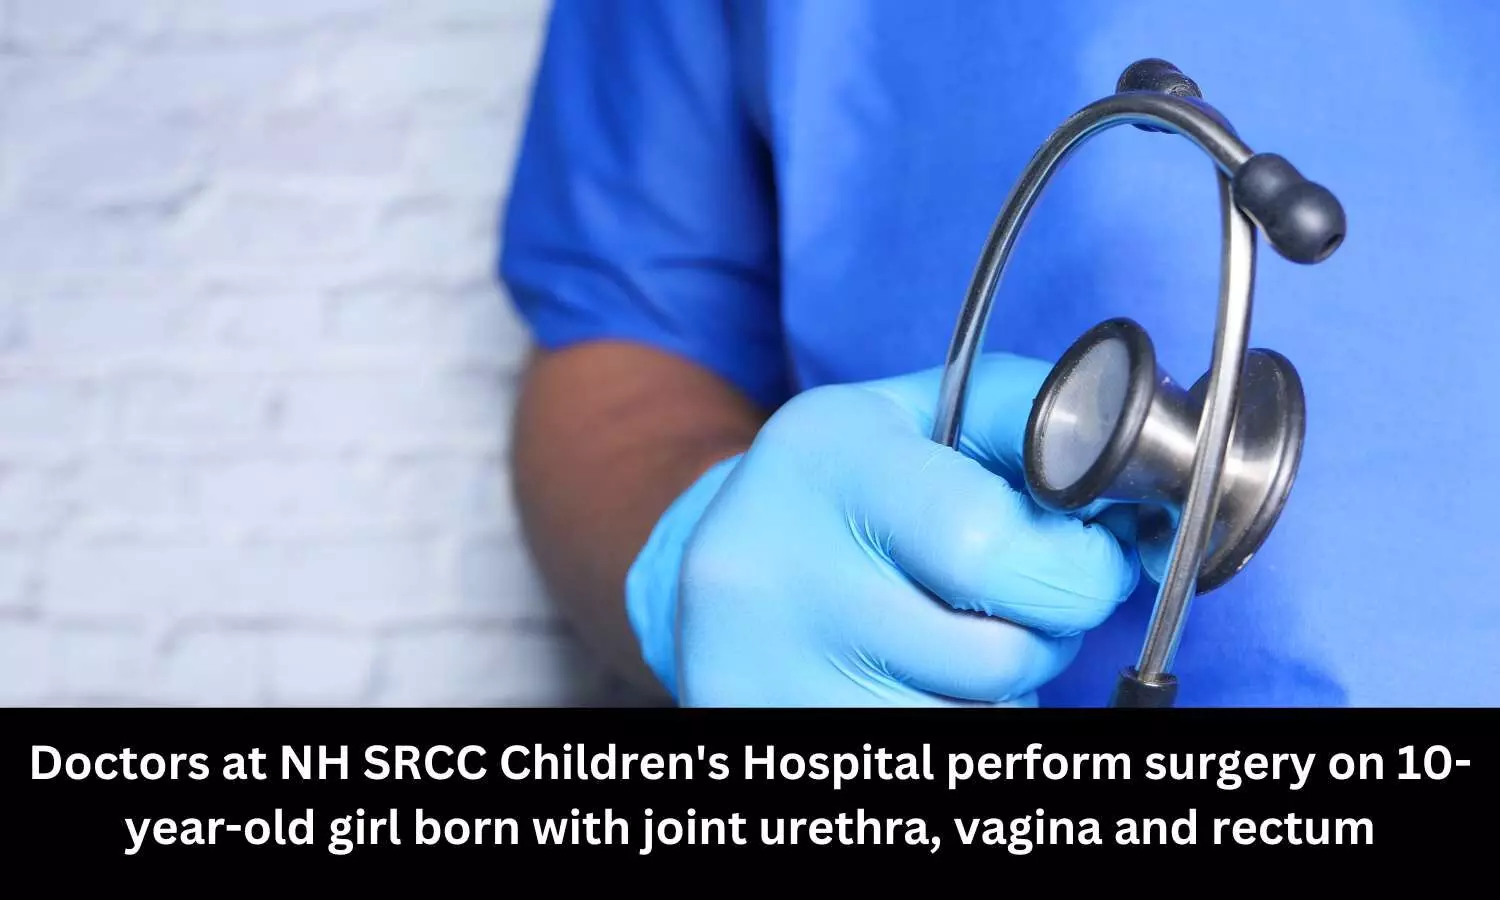 NH SRCC Childrens Hospital doctors perform surgery on girl born with joint urethra, vagina and rectum